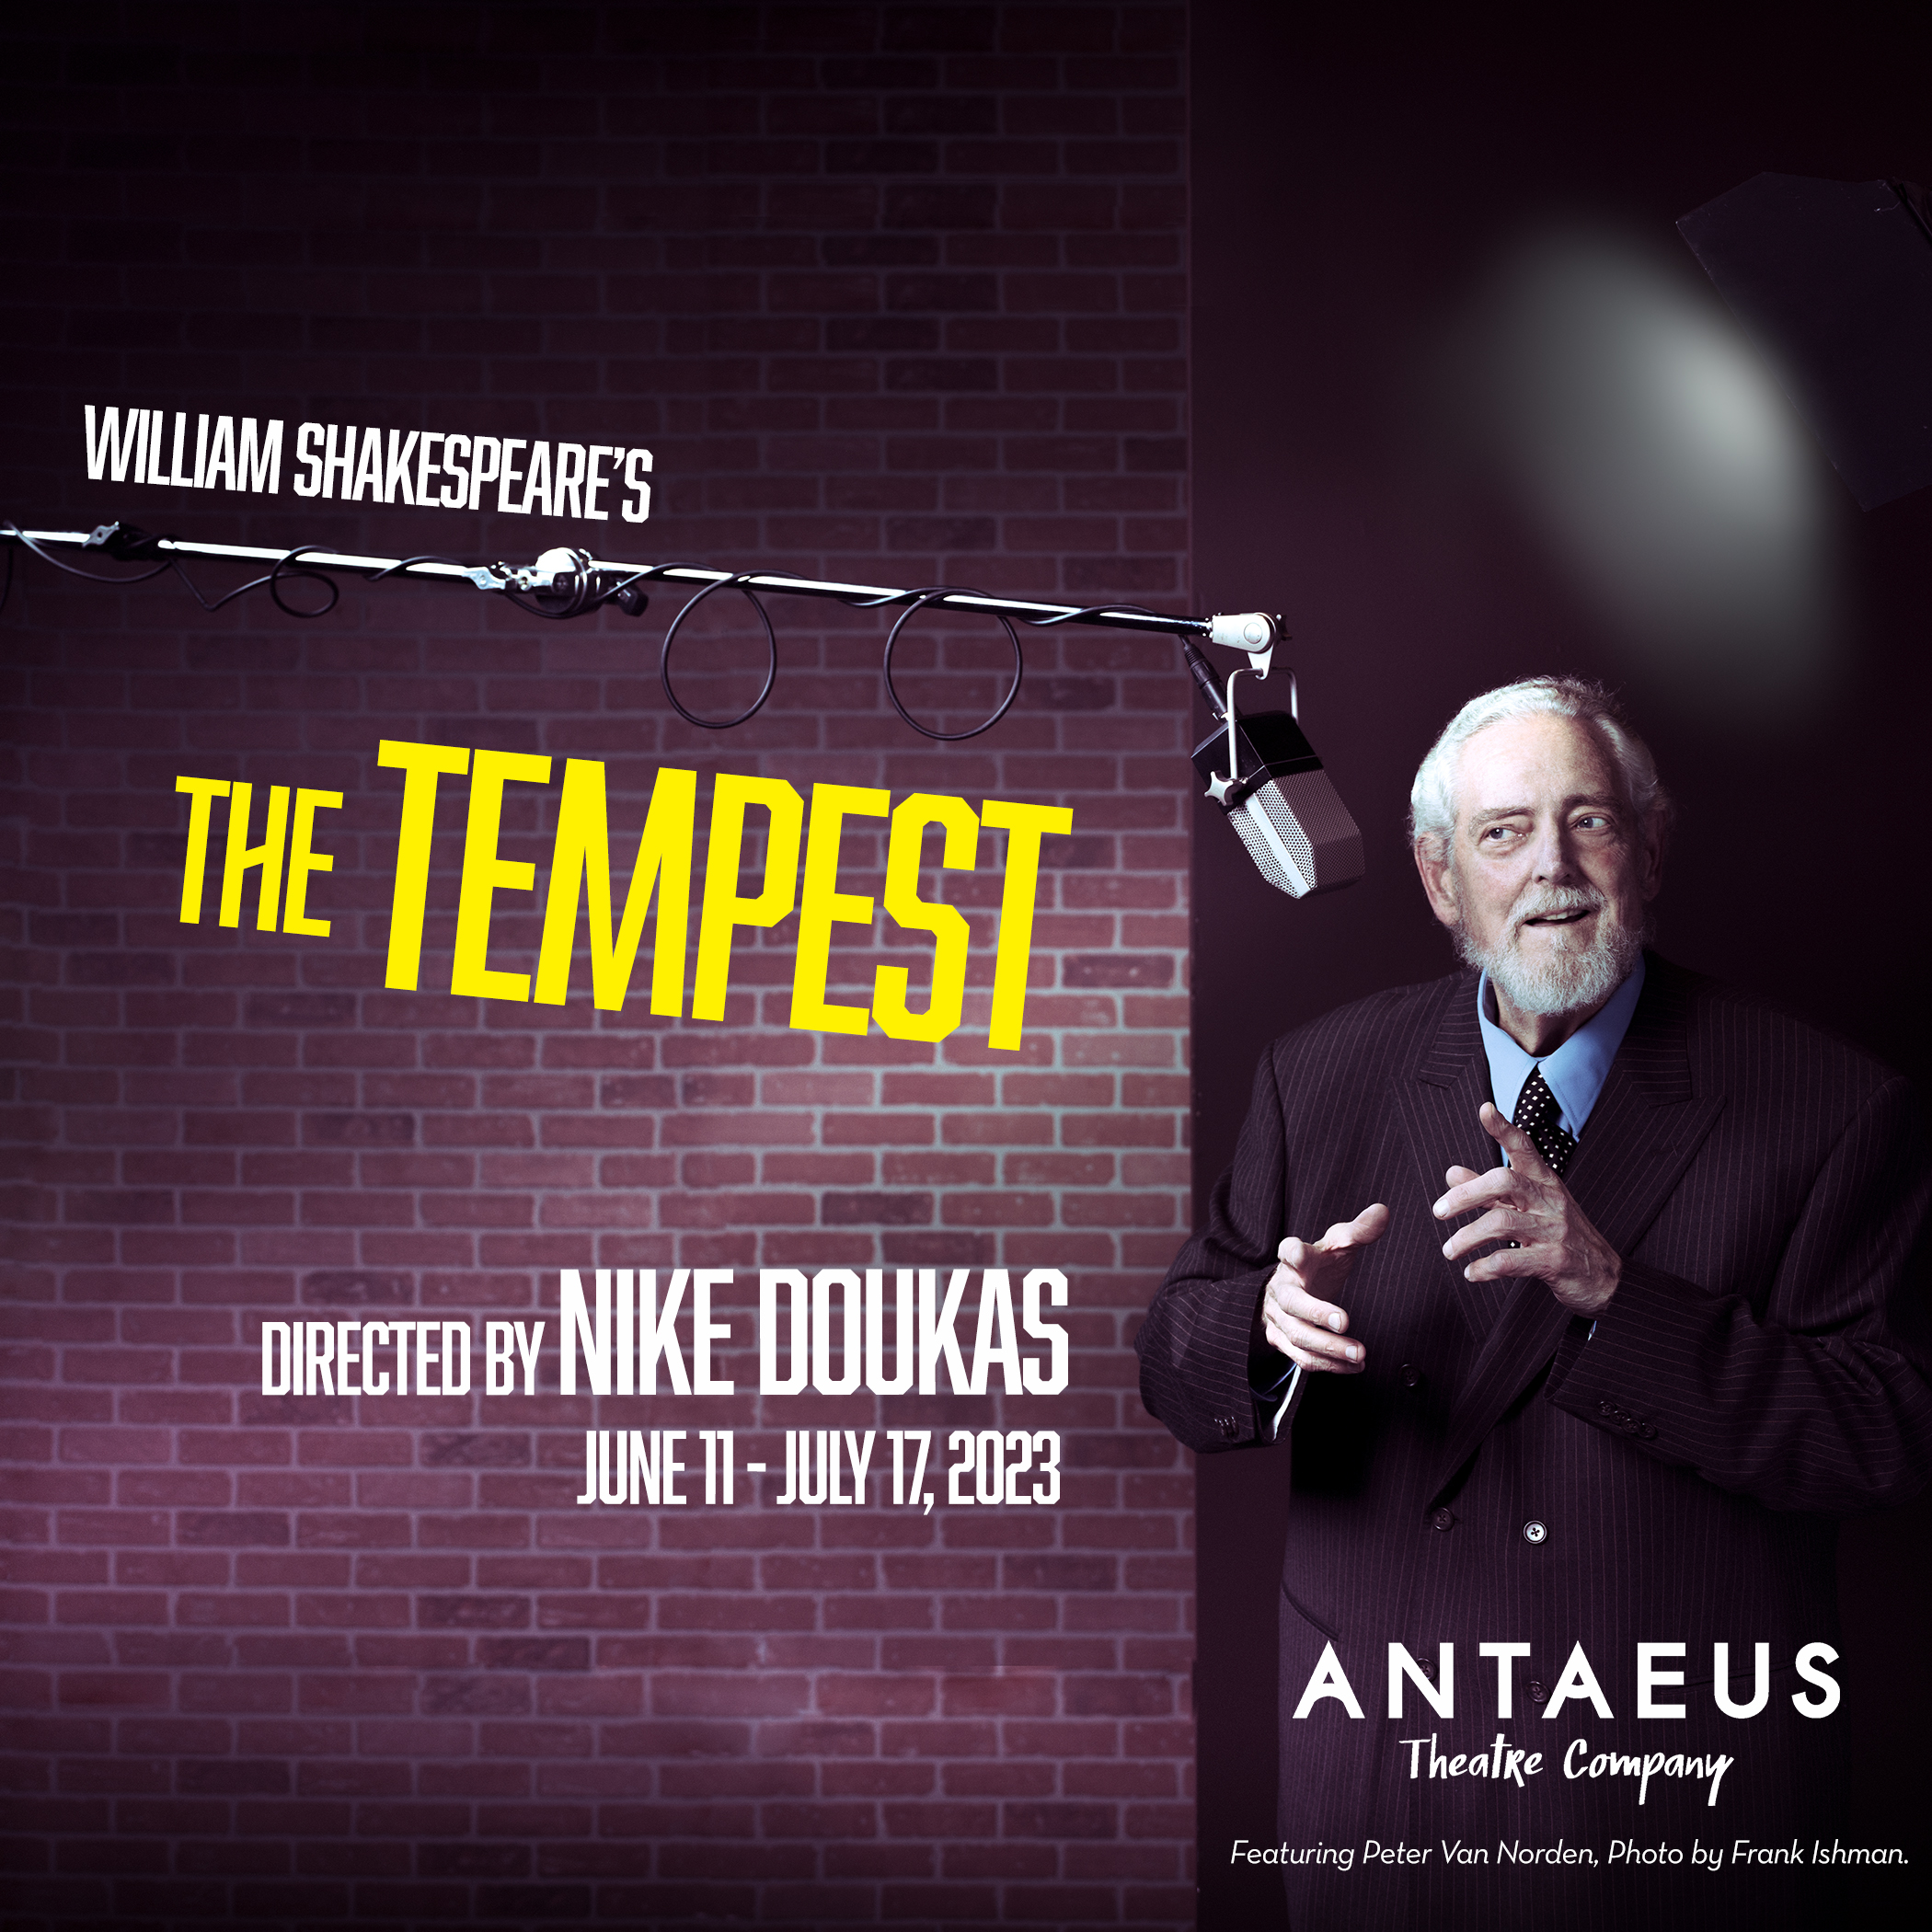 ON STAGE NEXT: The Tempest